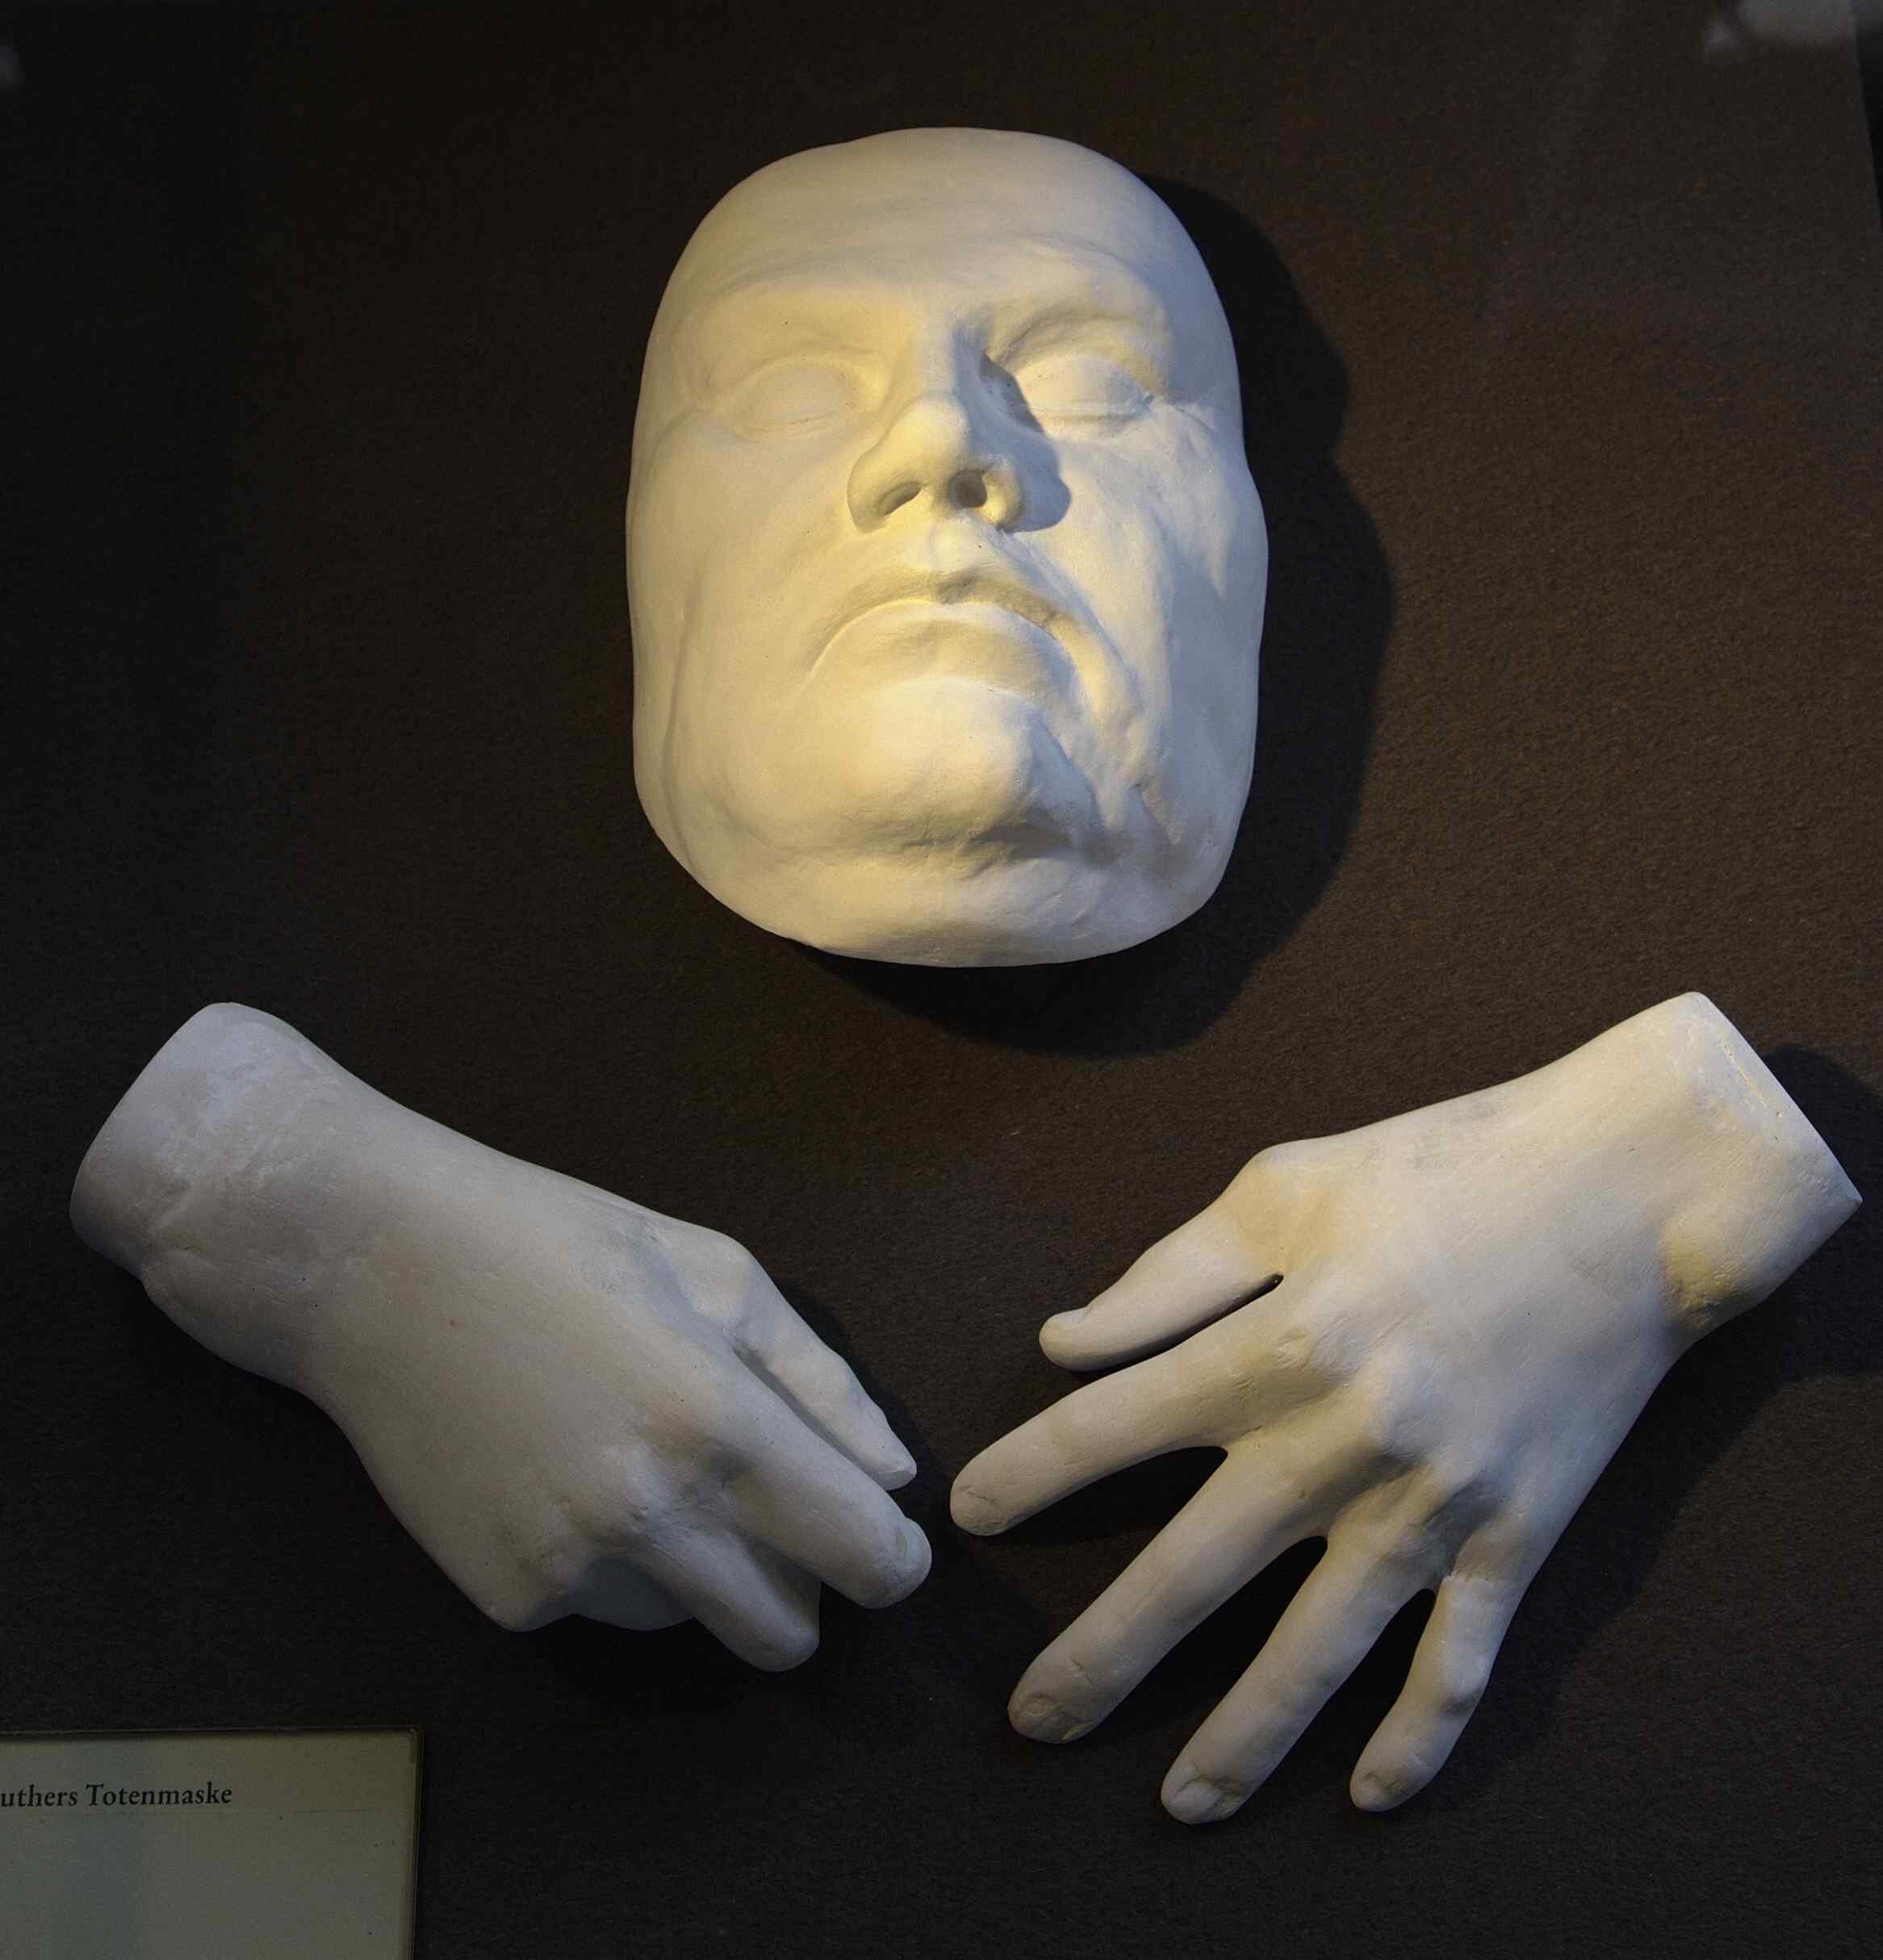 Luther Death Mask (with Hands)